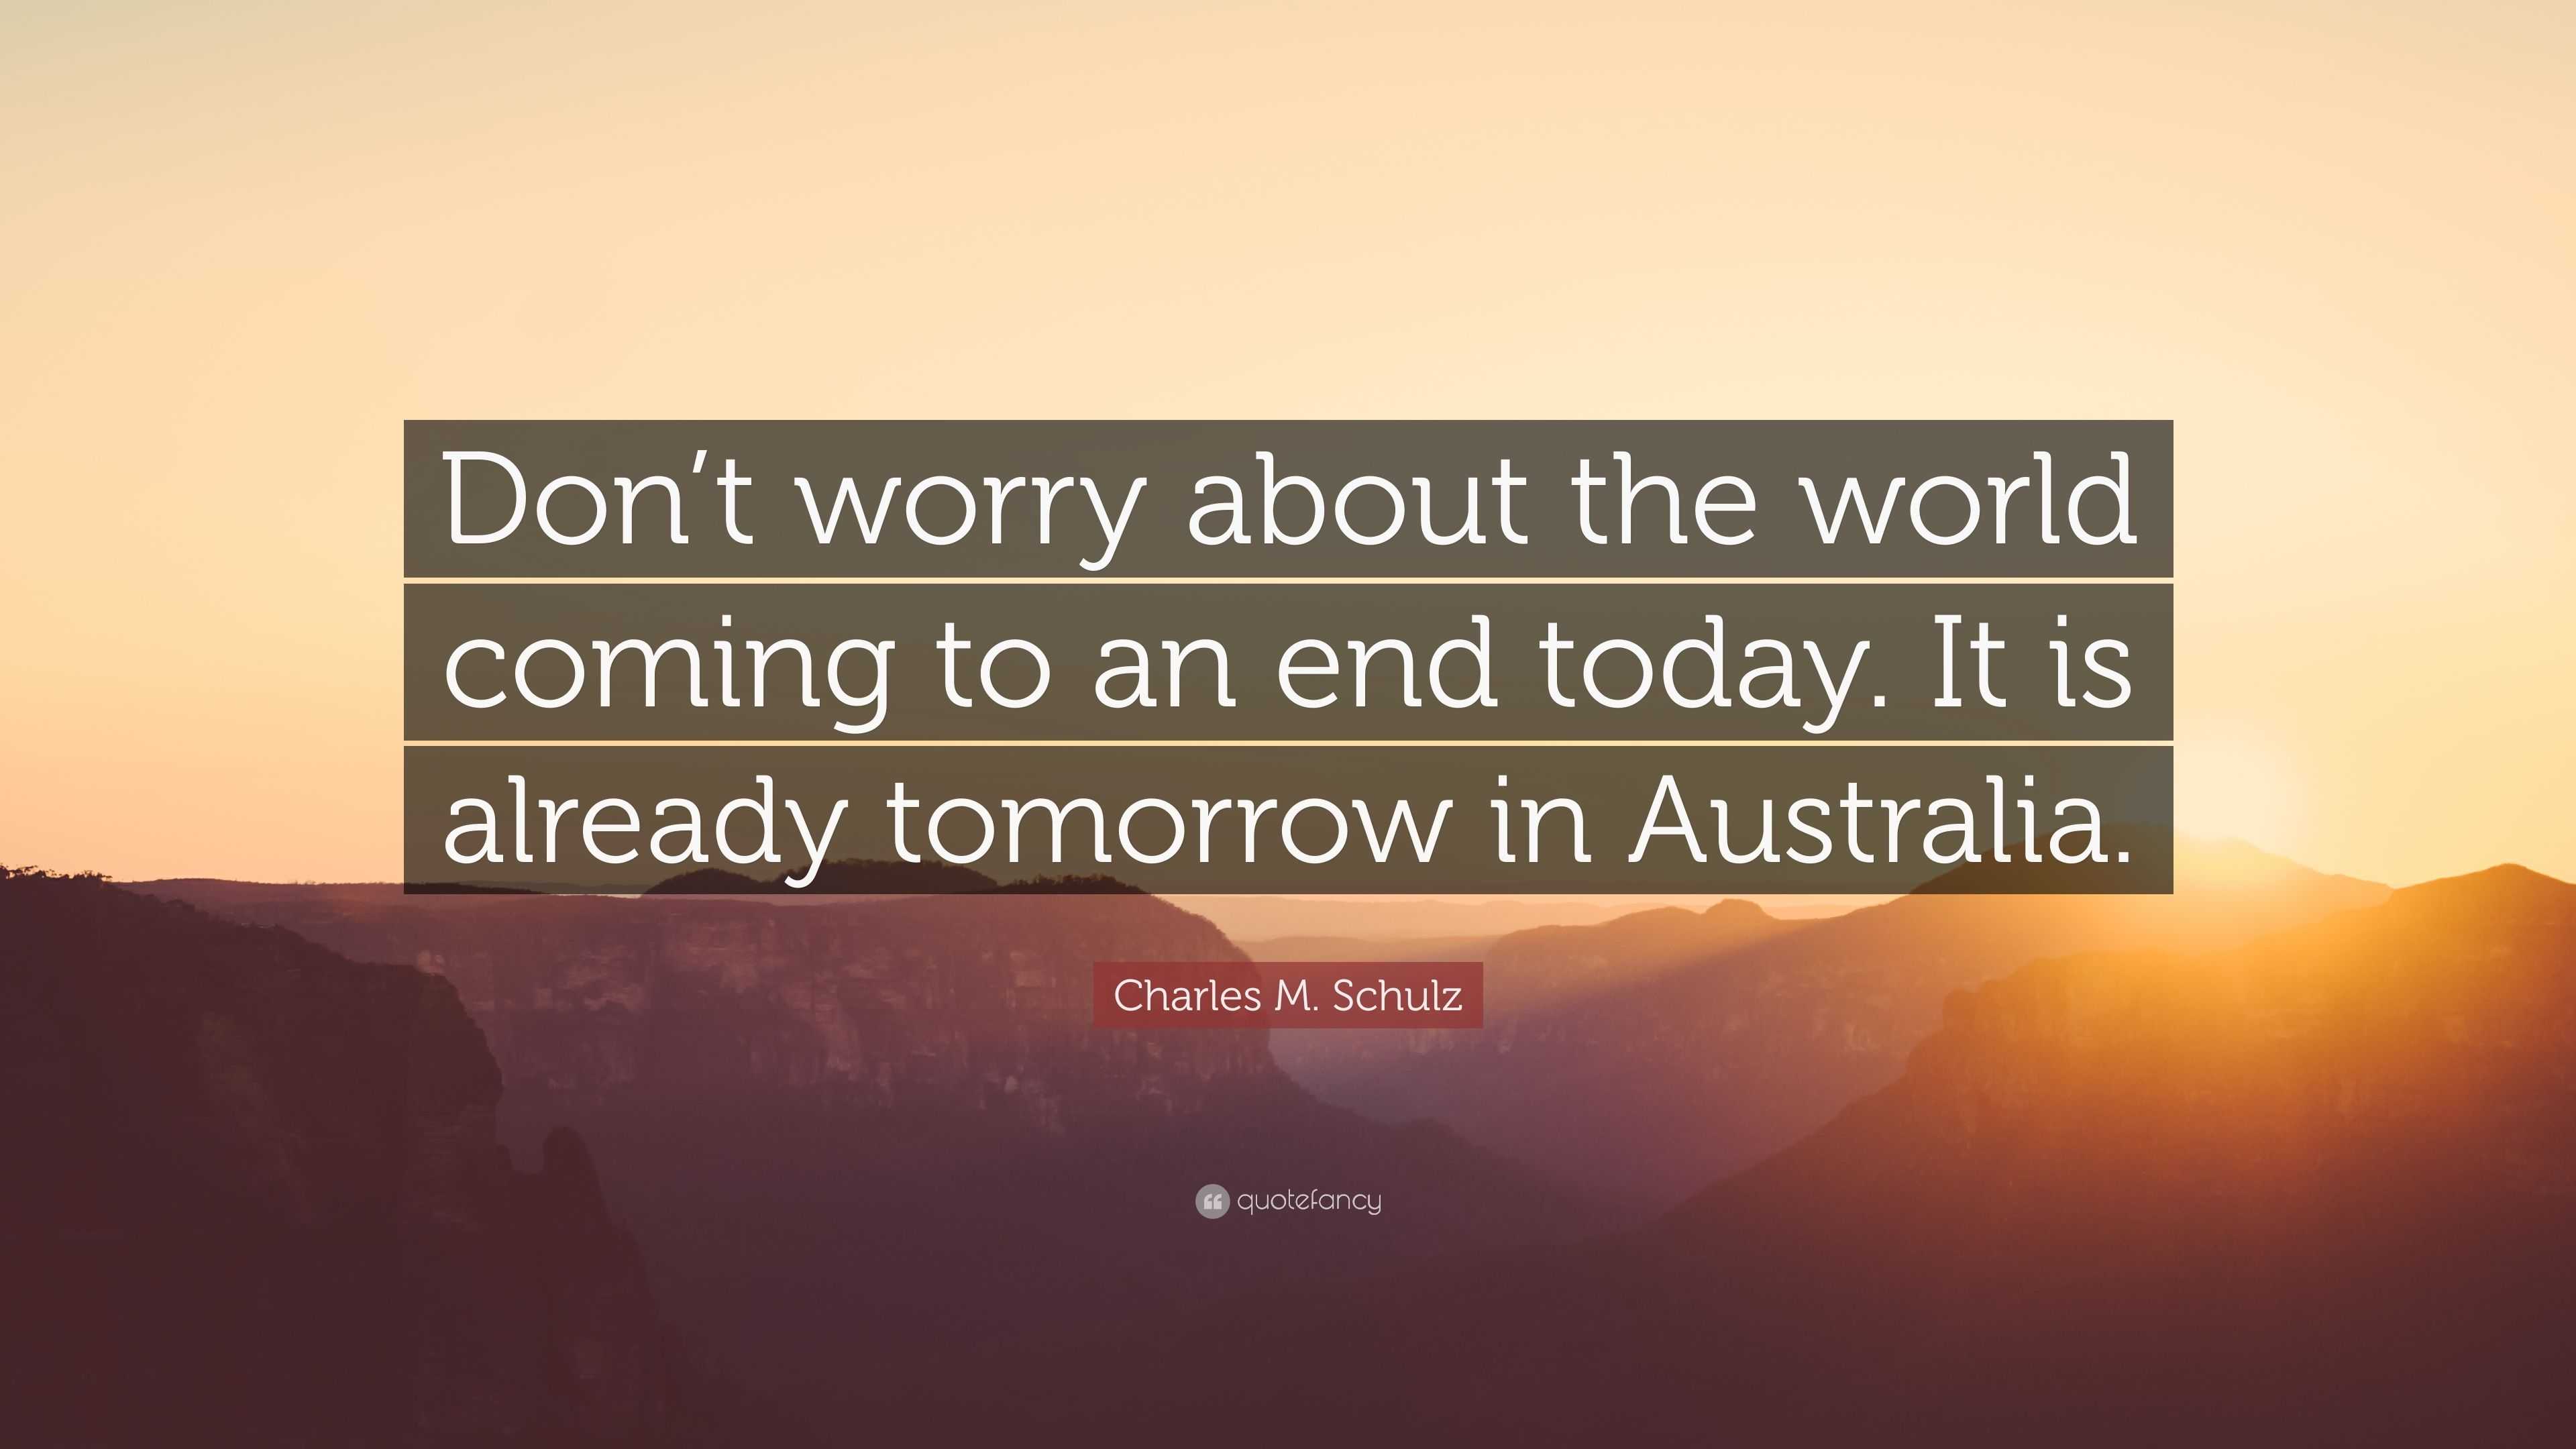 https://quotefancy.com/media/wallpaper/3840x2160/4787365-Charles-M-Schulz-Quote-Don-t-worry-about-the-world-coming-to-an.jpg